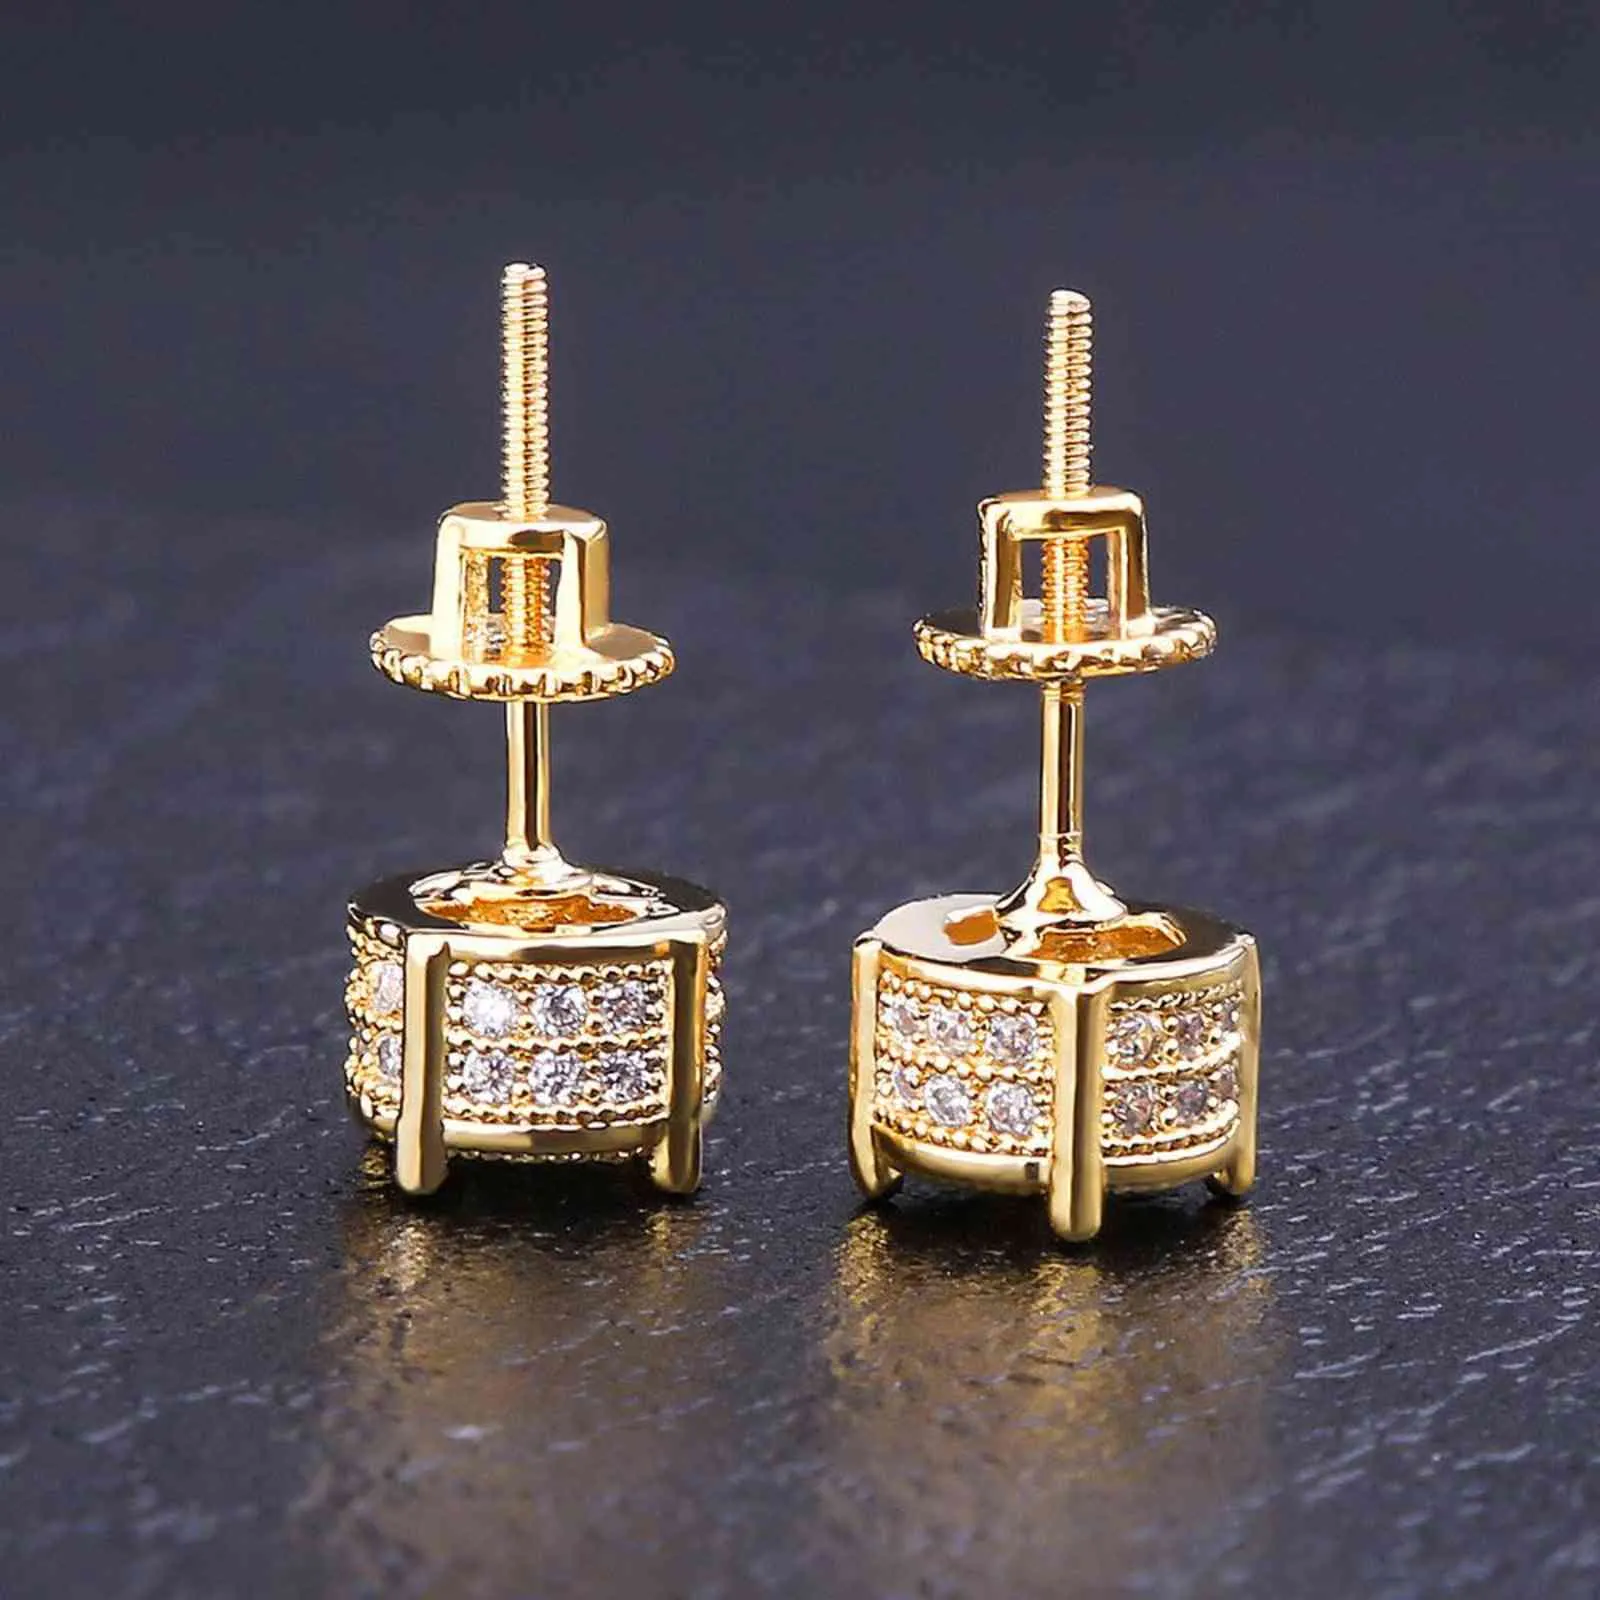 KRKC&CO Gold Iced Out CZ Stud Round Earrings Hip Hop Jewelry for // online store for Wholesale Agent in Stock